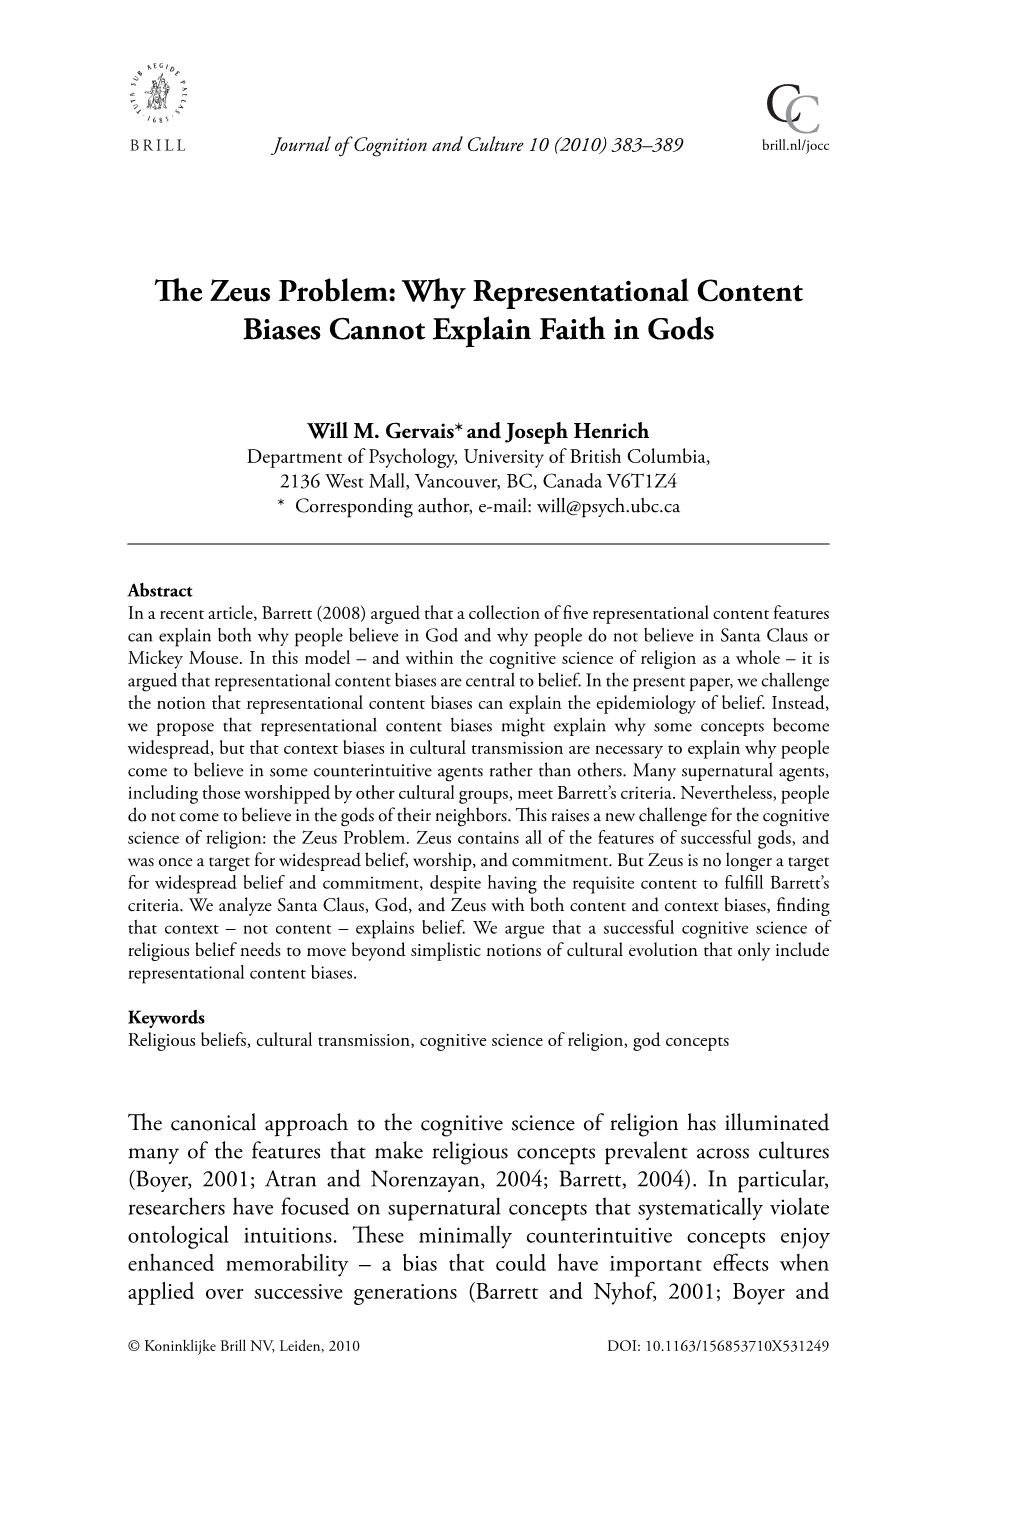 The Zeus Problem: Why Representational Content Biases Cannot Explain Faith in Gods